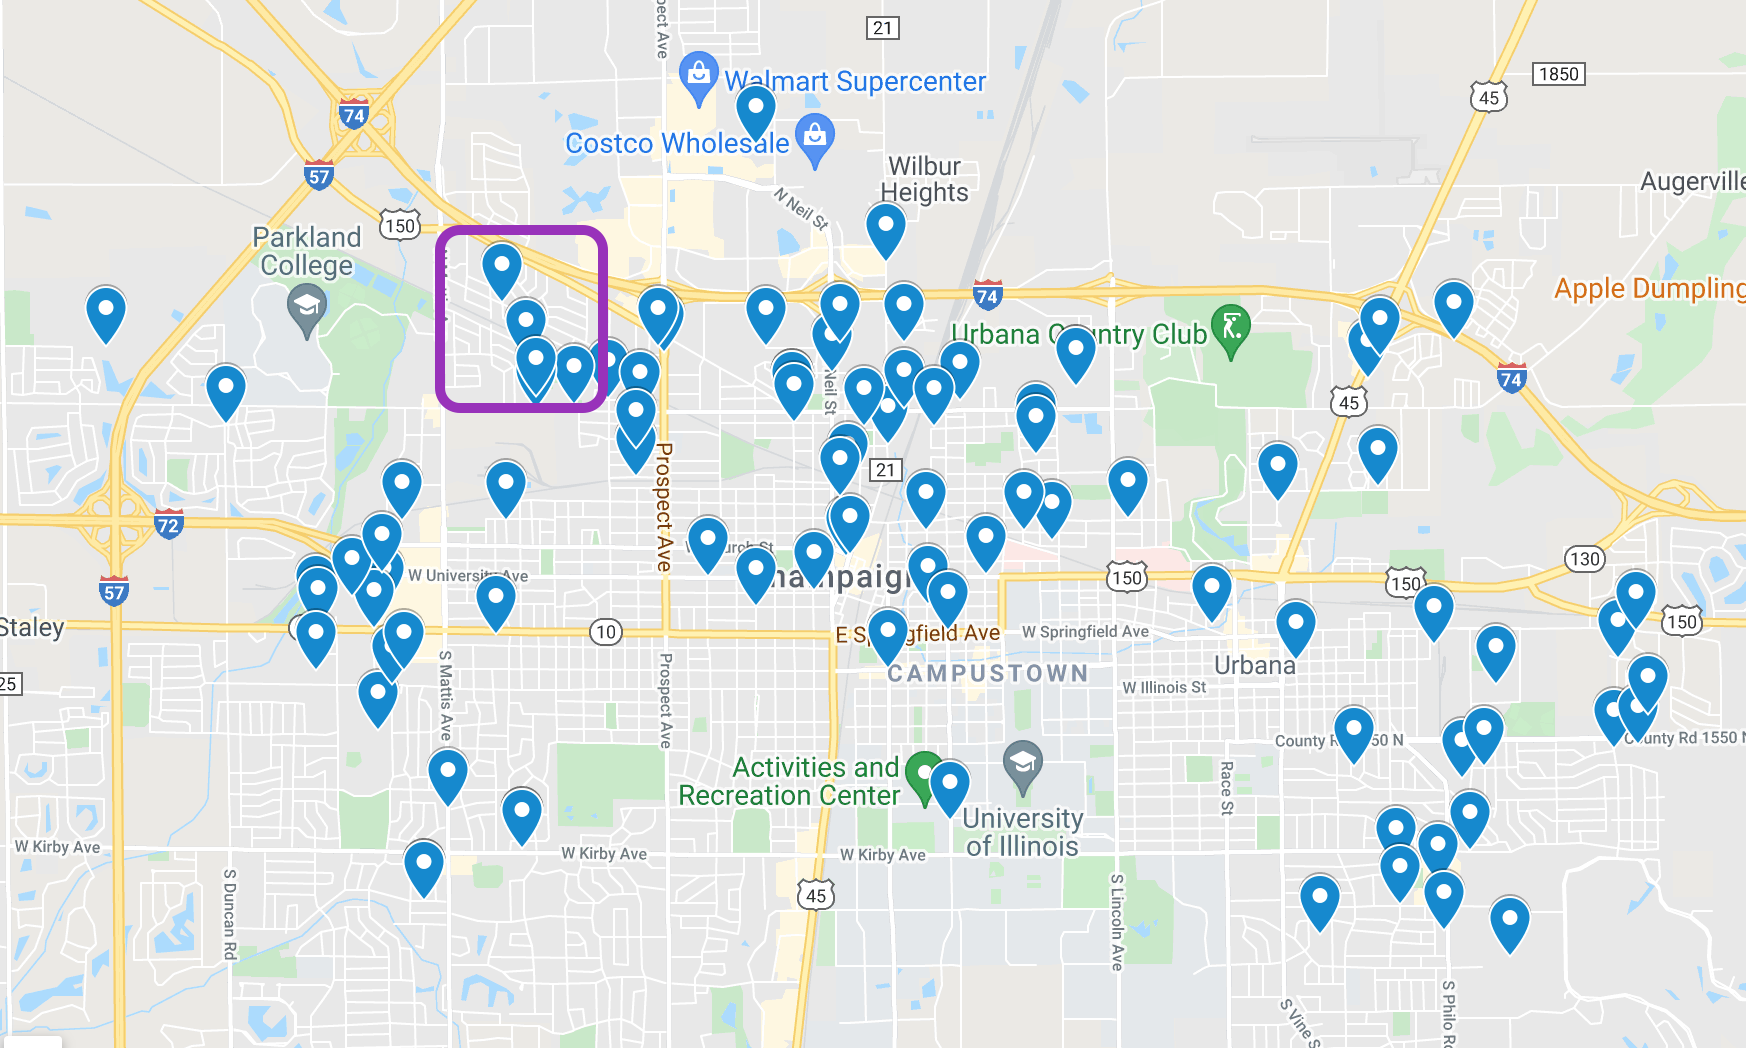 Map indicates all locations of know injury or death from gun violence in Champaign-Urbana. A purple square indicates the Garden Hills neighborhood, where Champaign Police want to employ GDT. Google Map by Gun Violence Archive.